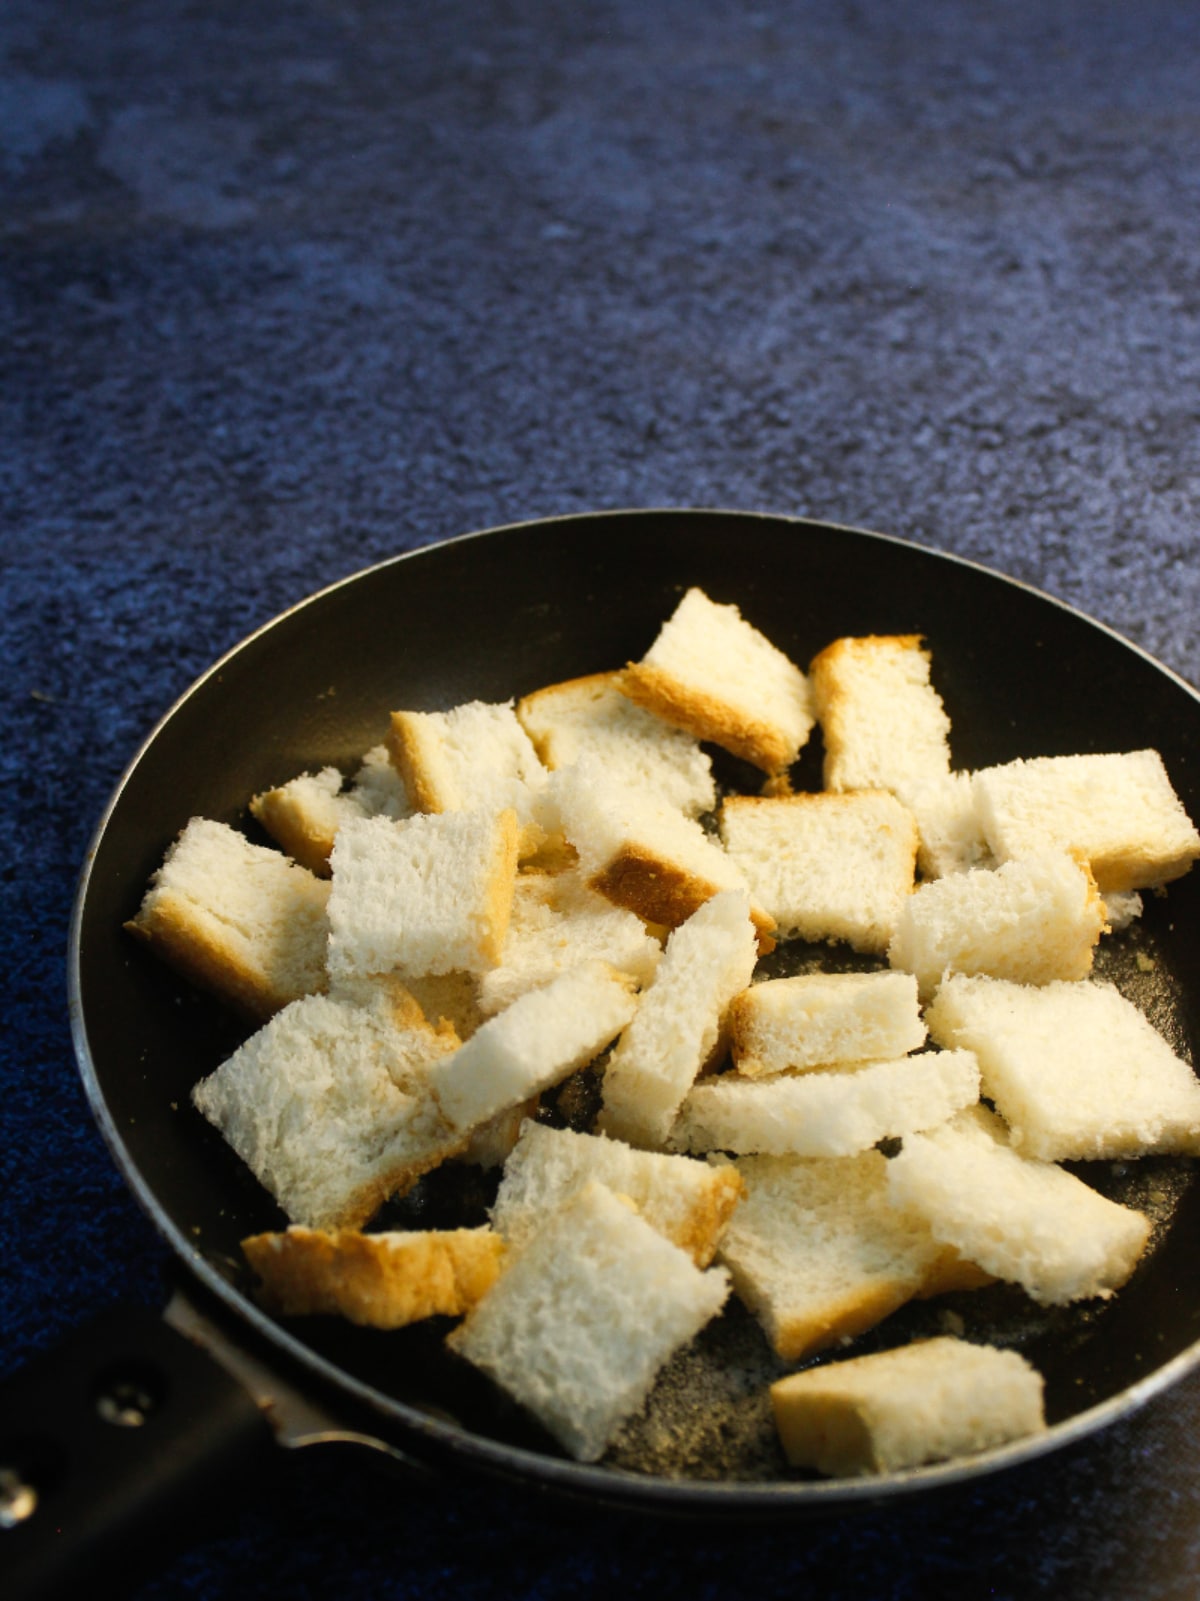 Add bread cubes to the pan